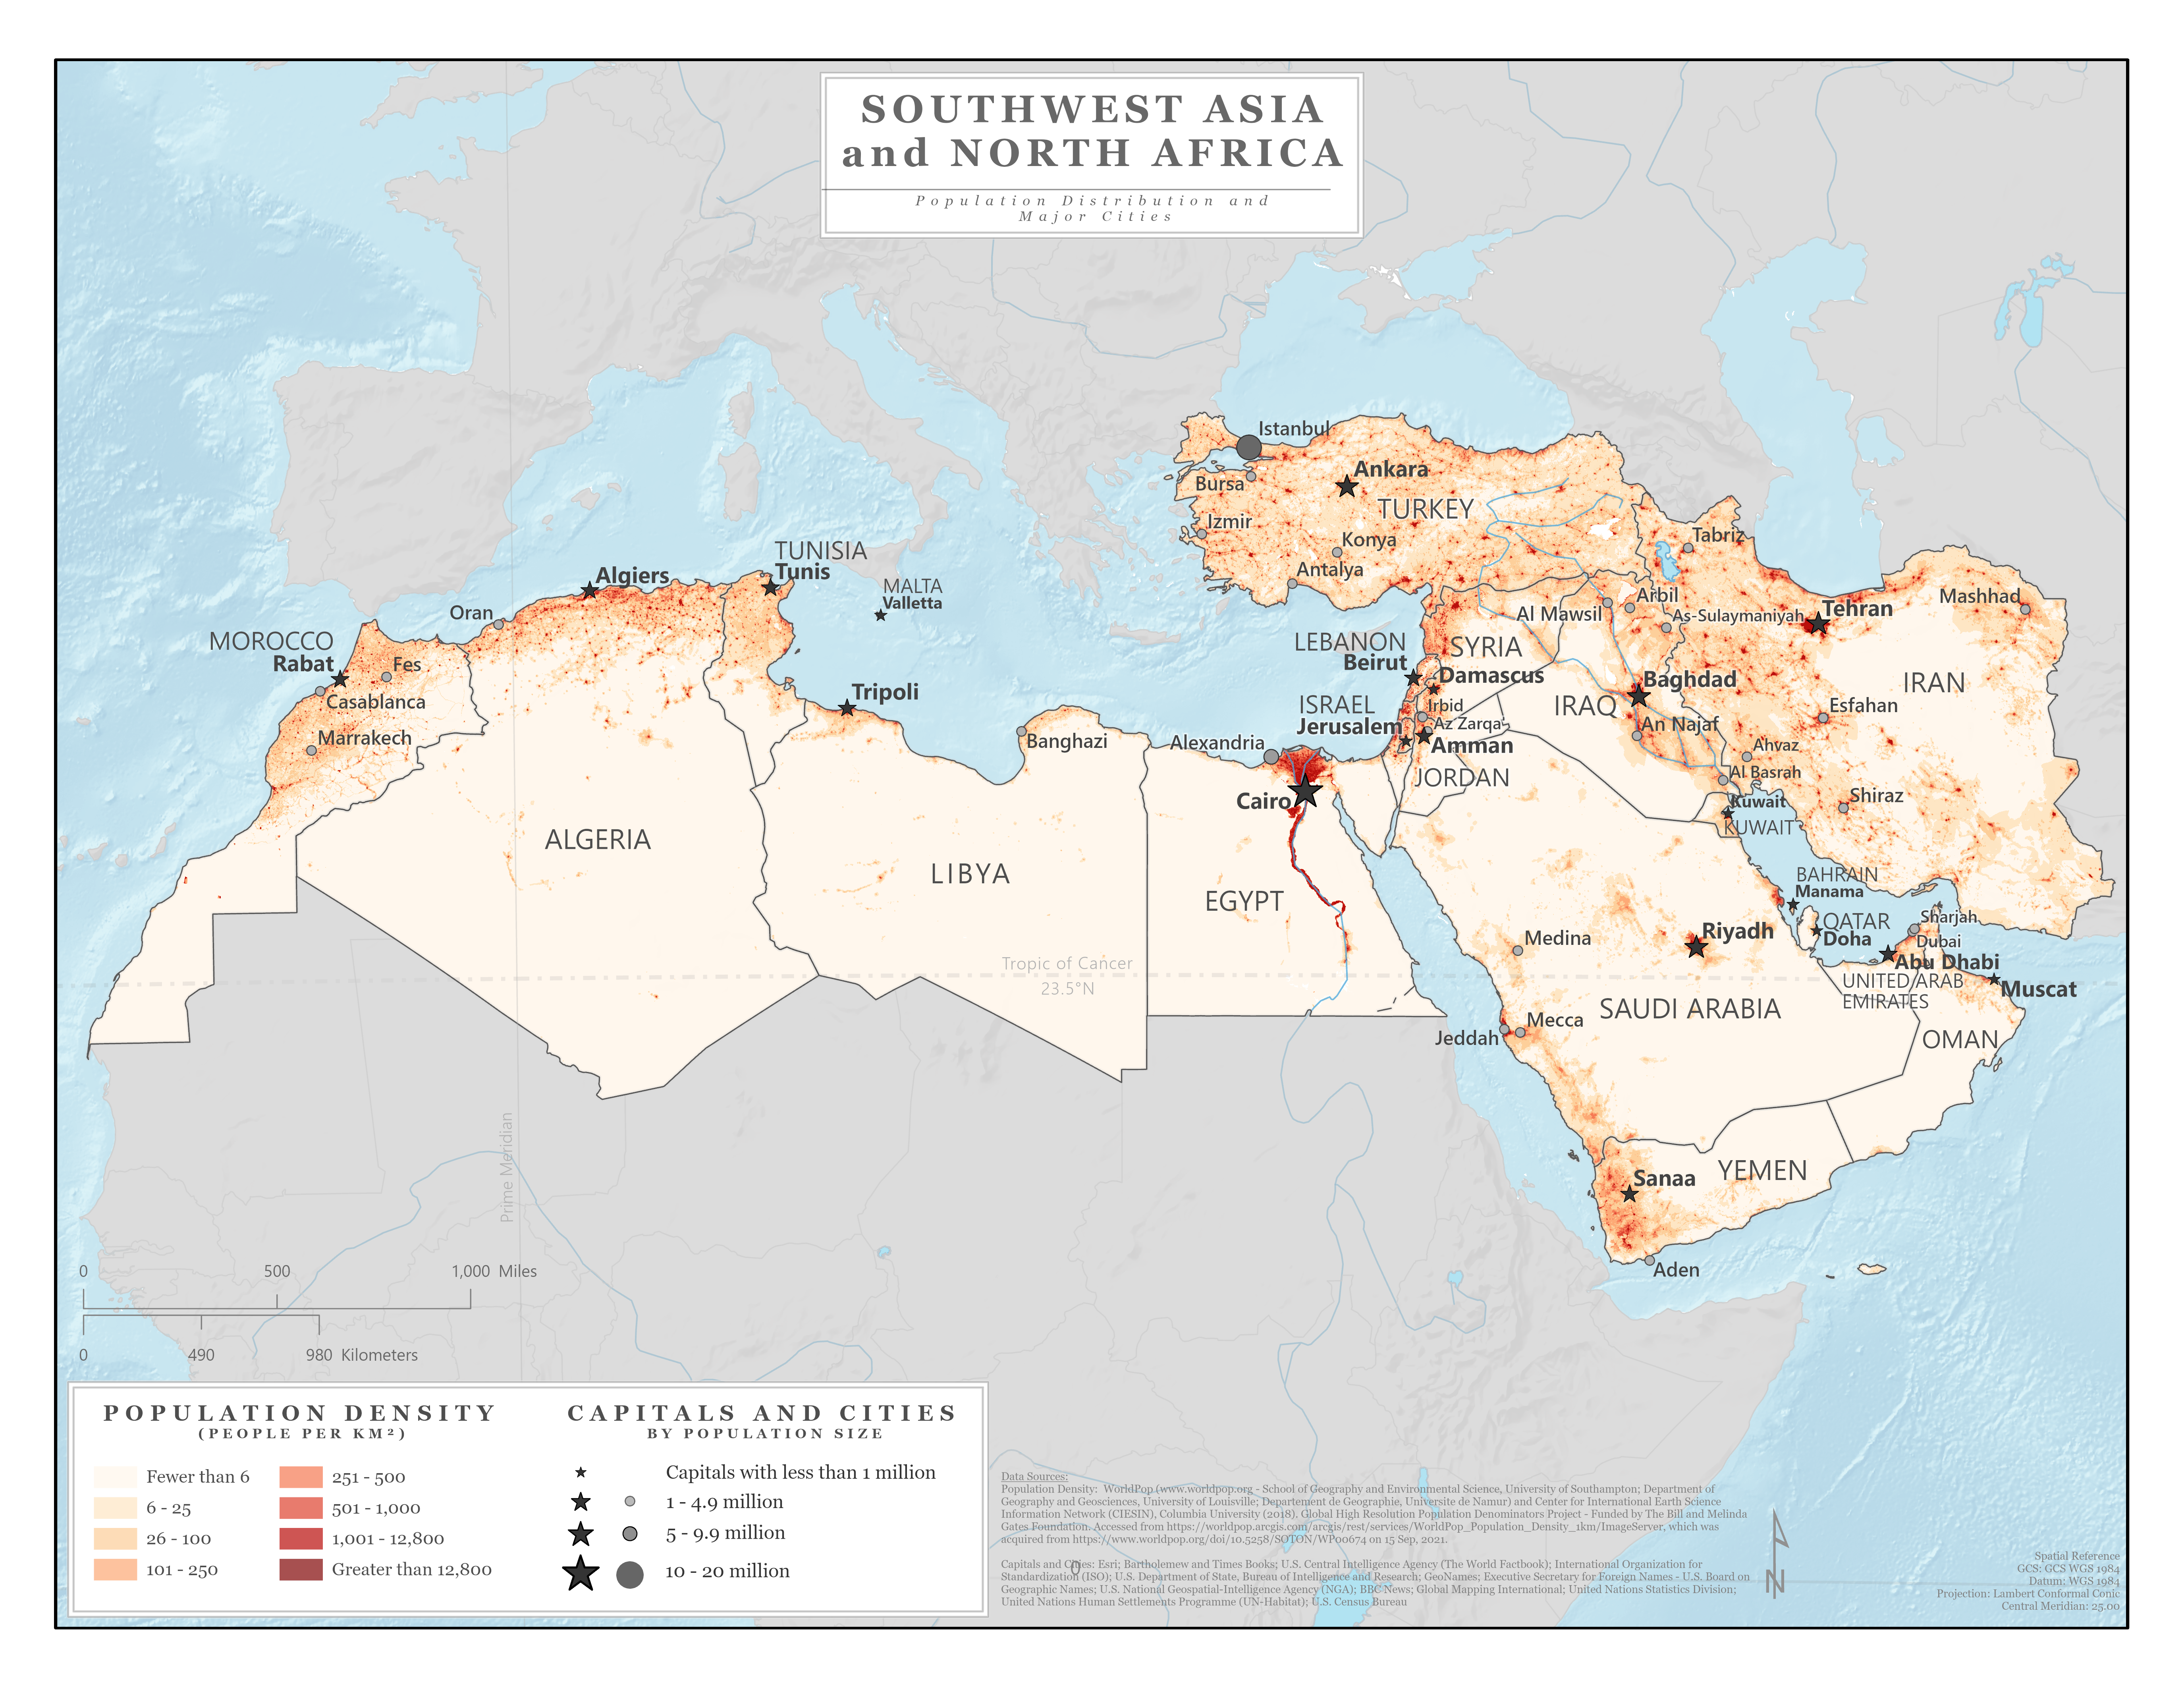 Countries, capitals, and population sizes map of Southwest Asia and North Africa